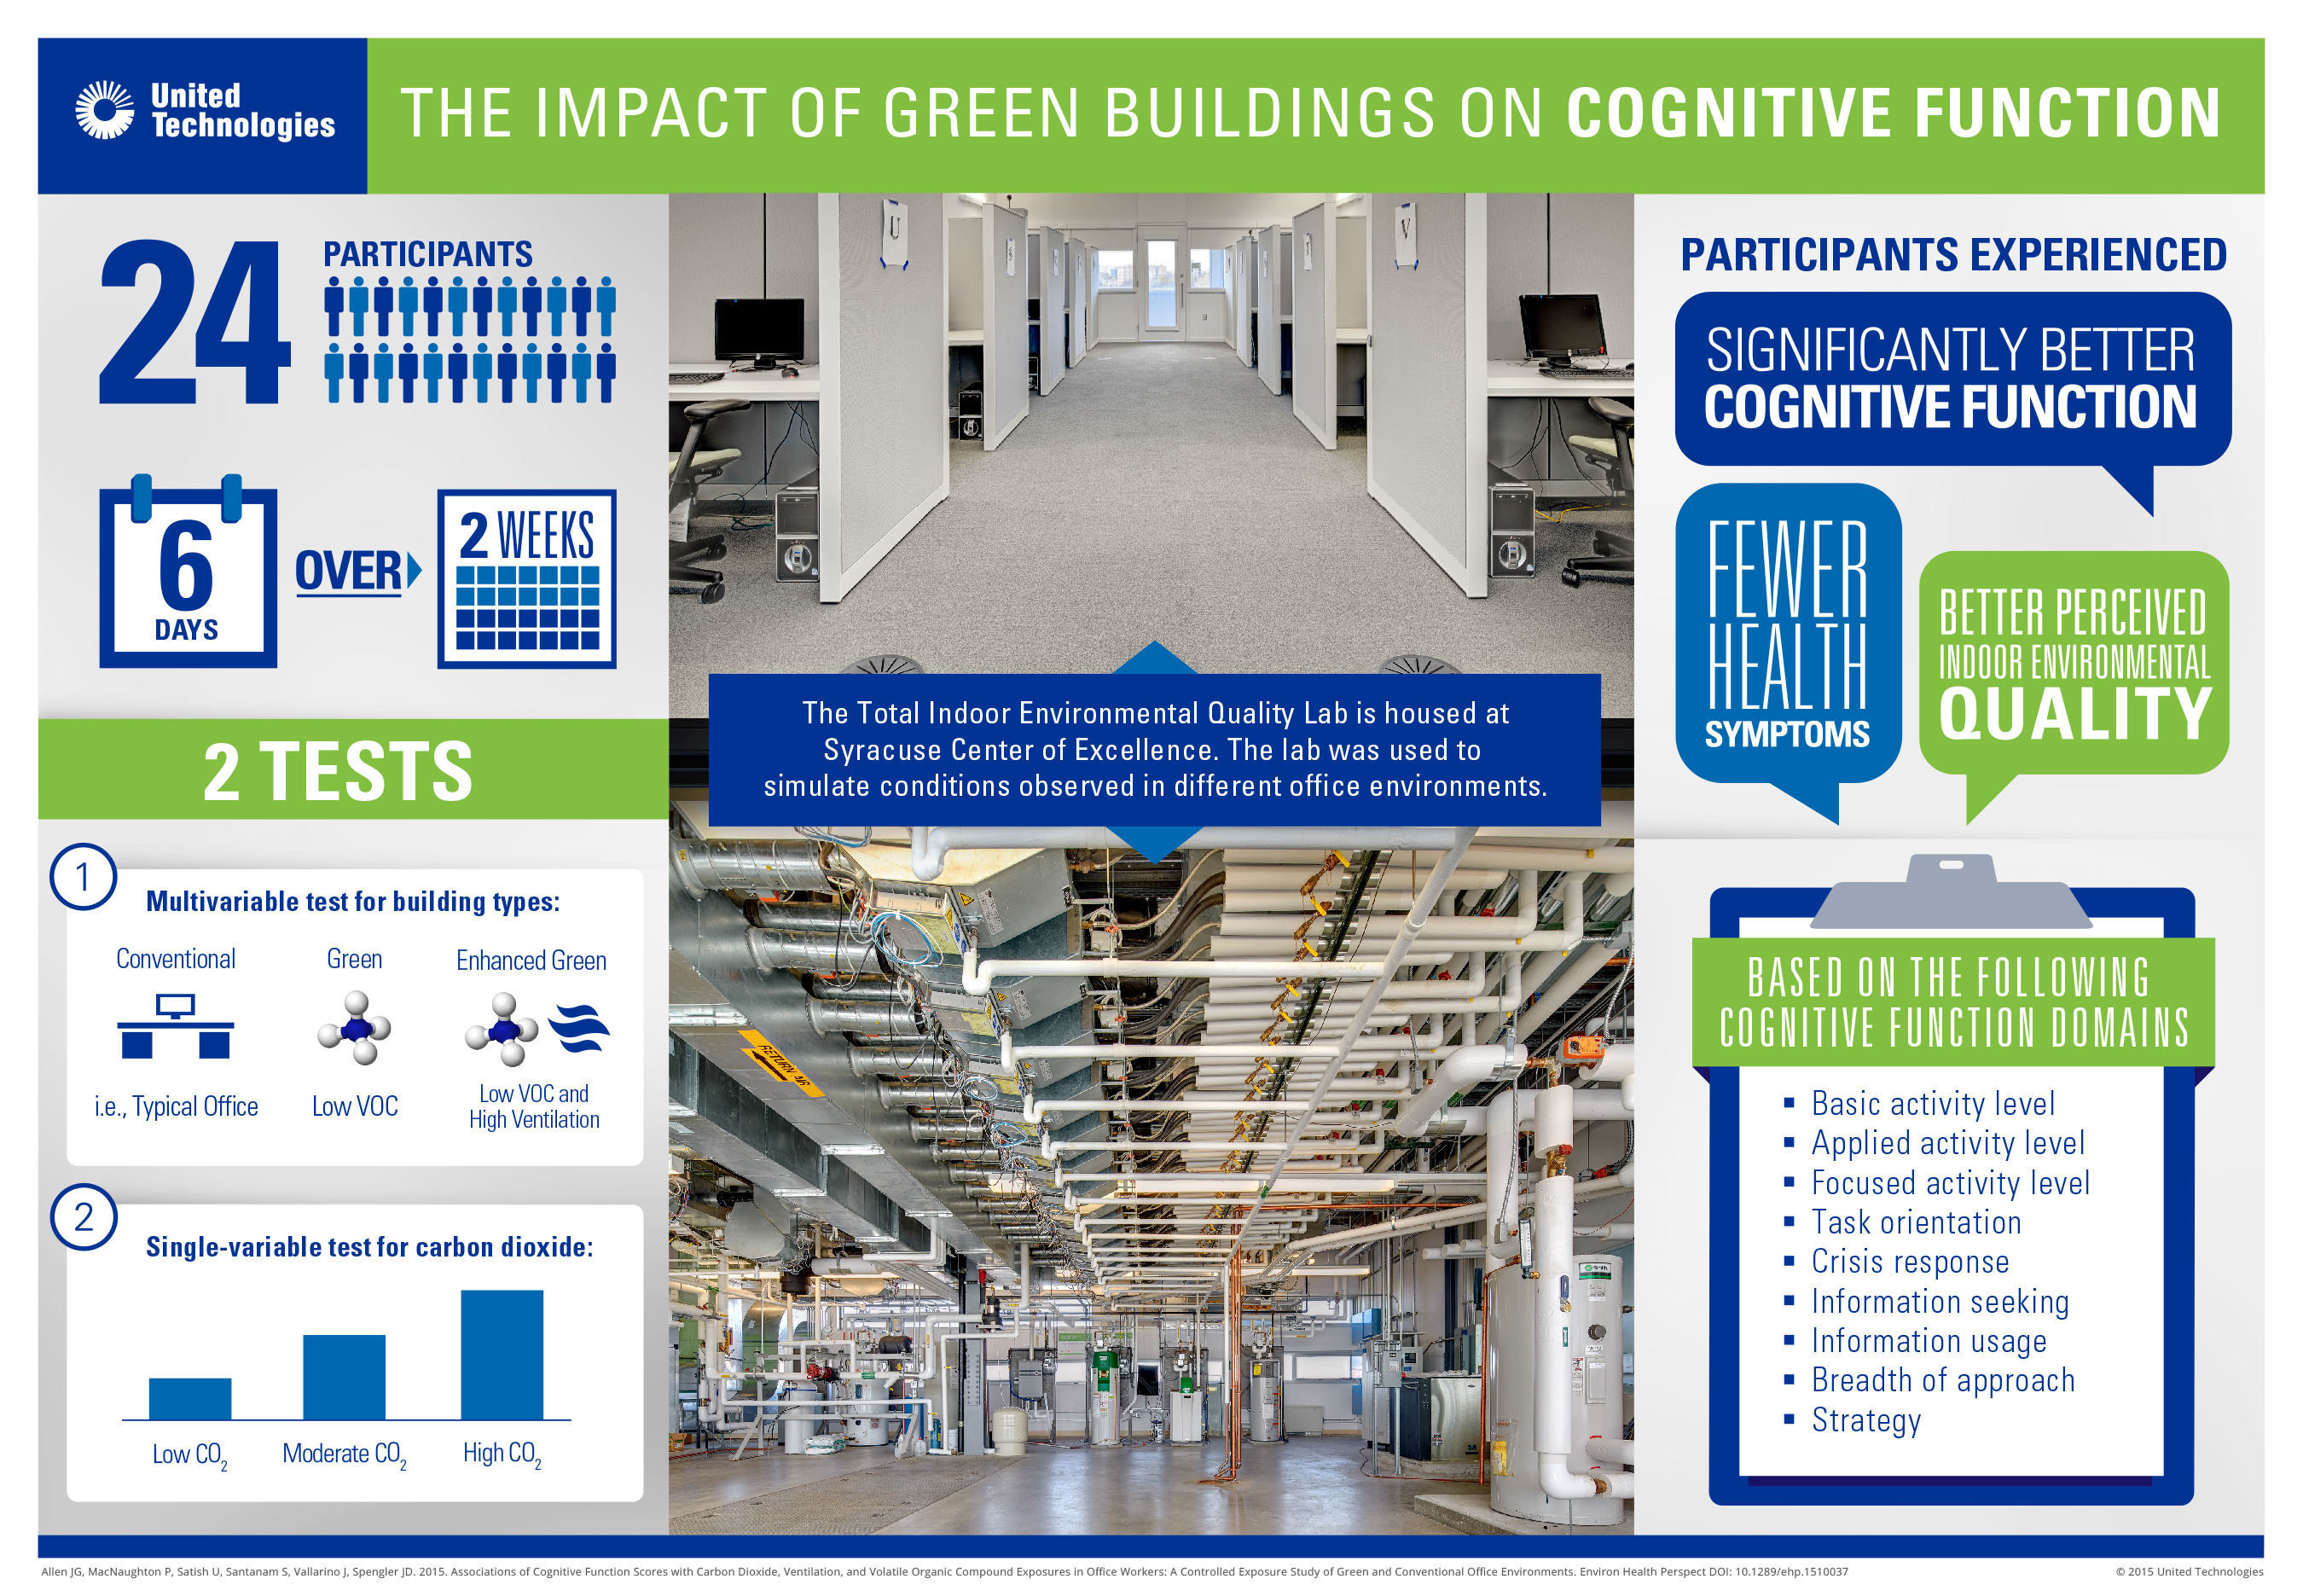 The Impact of Green Buildings on Cognitive Function study overview.